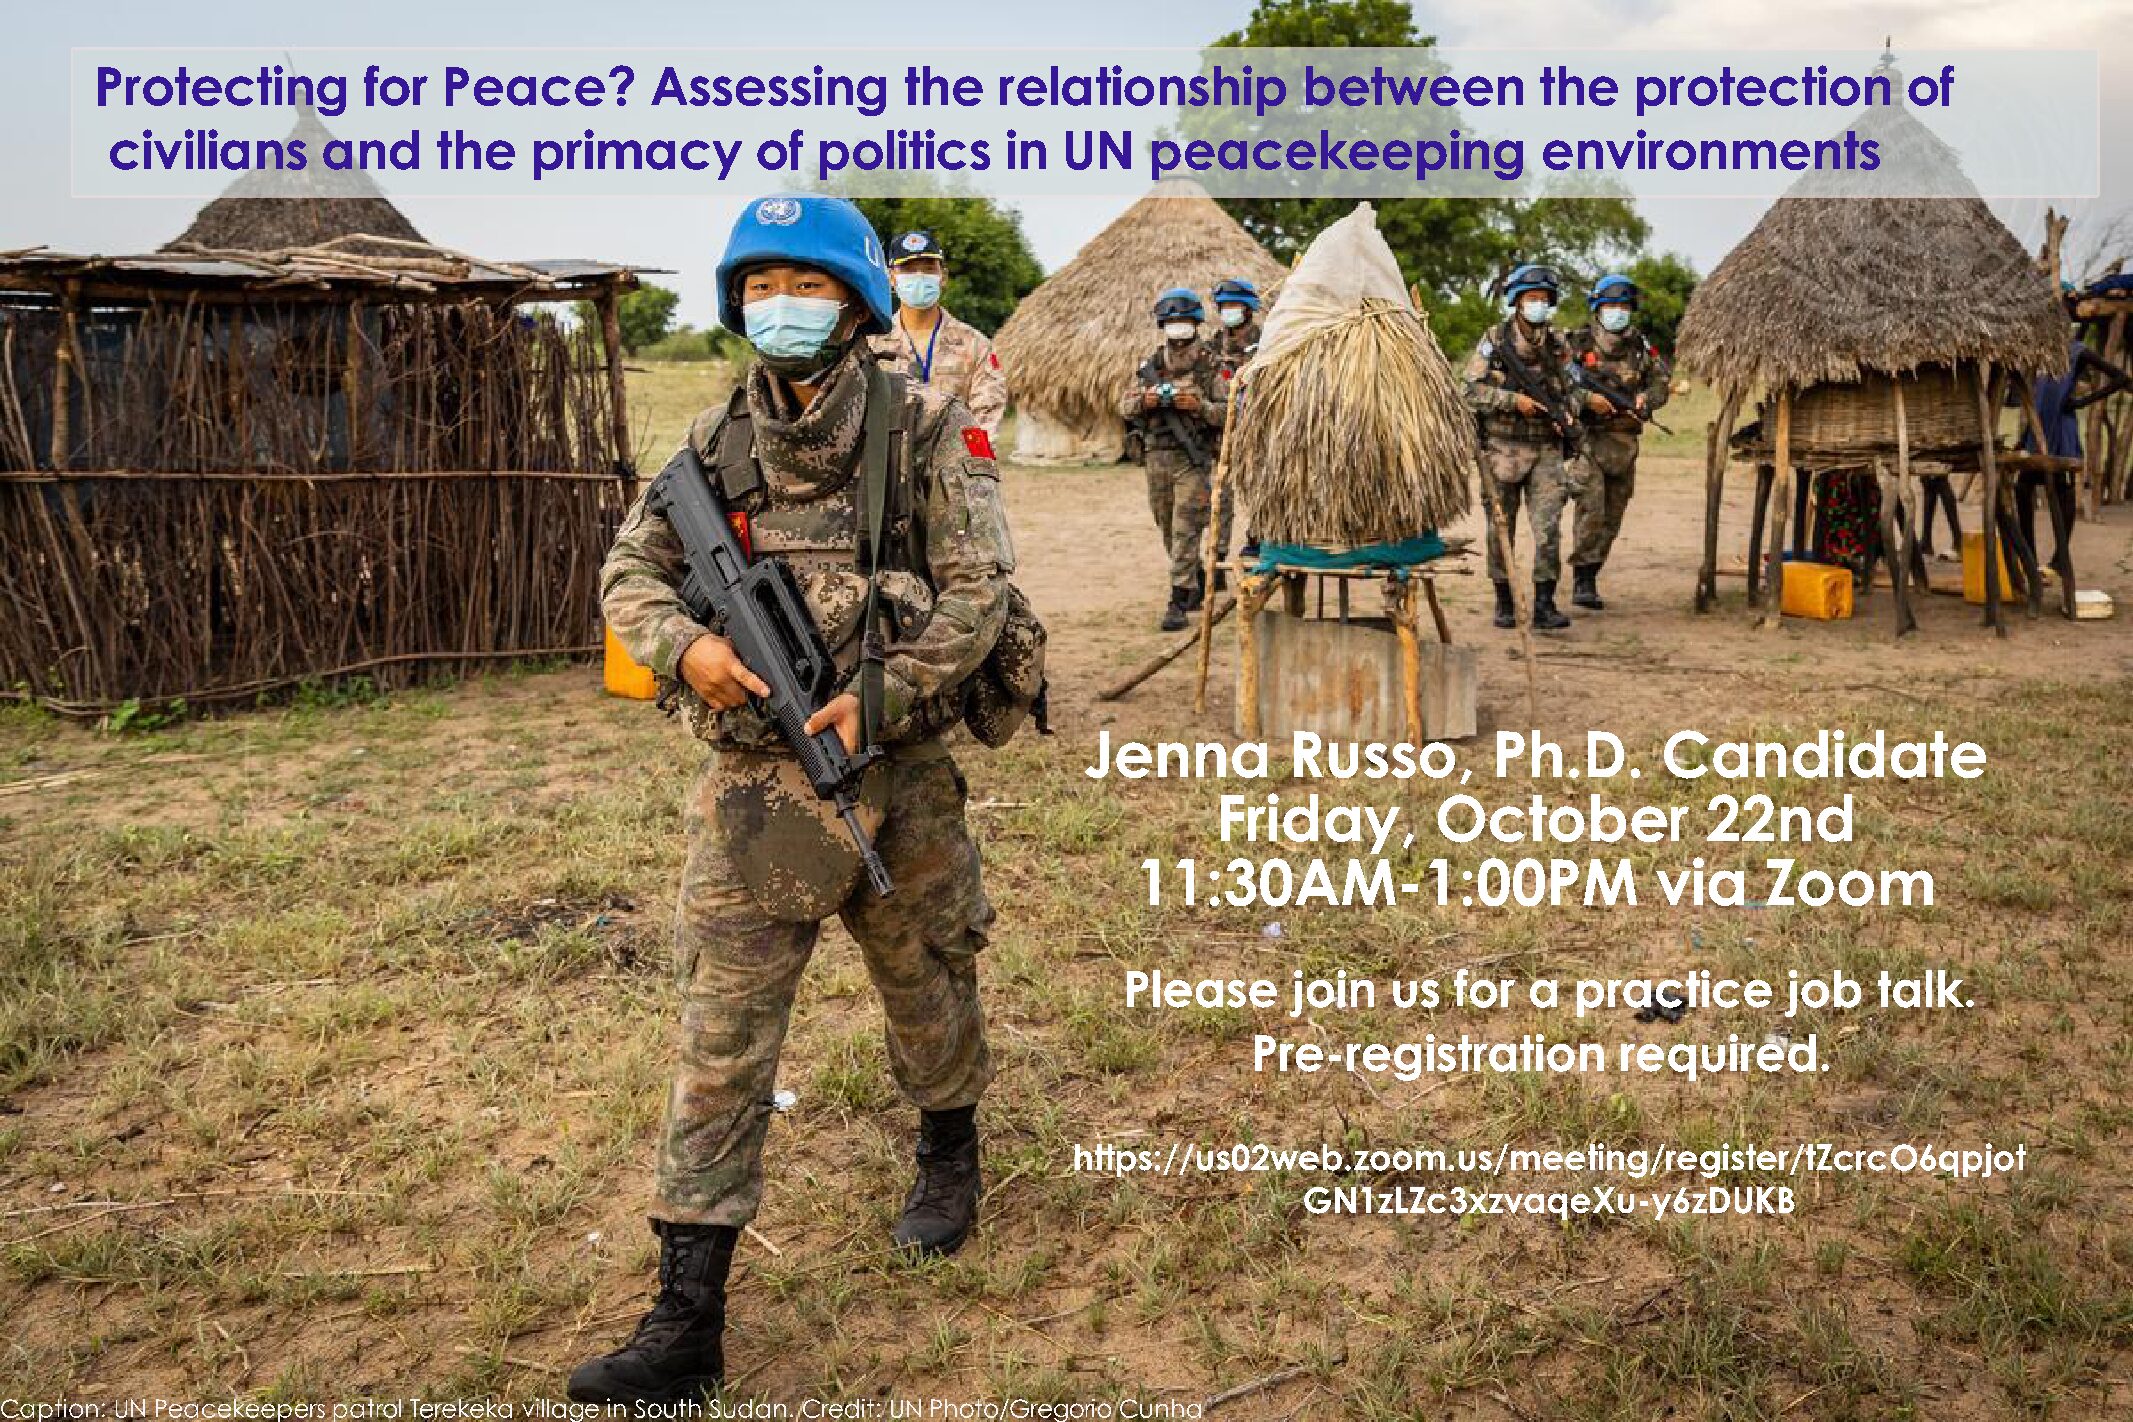 Professional Development Workshop: Practice Job Talk, Jenna Russo, ""Protecting for Peace? Assessing the relationship between the protection of civilians and the primacy of politics in UN peacekeeping environments," Friday, October 22, 11:30AM–1:00PM